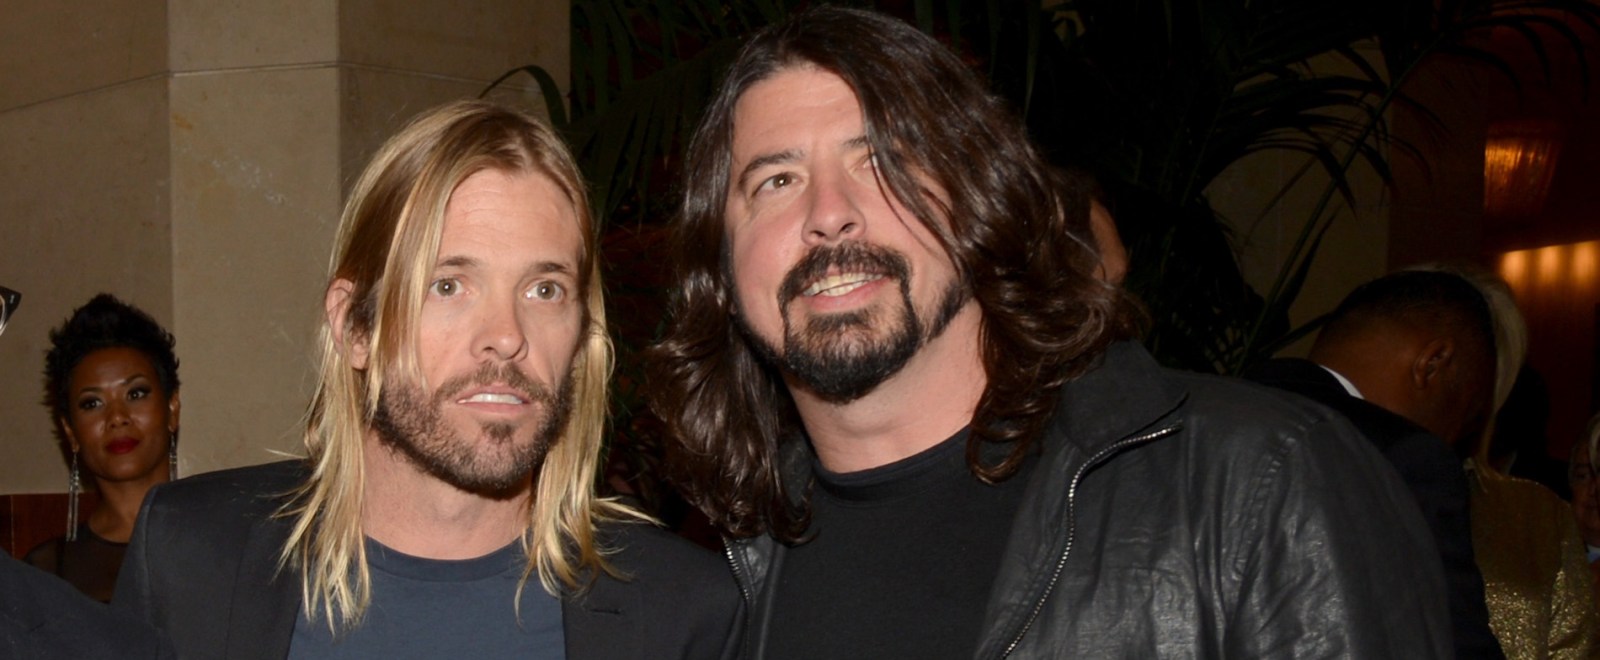 Taylor Hawkins Dave Grohl Foo Fighters 56th annual Grammy Awards Pre-Grammy Gala 2014